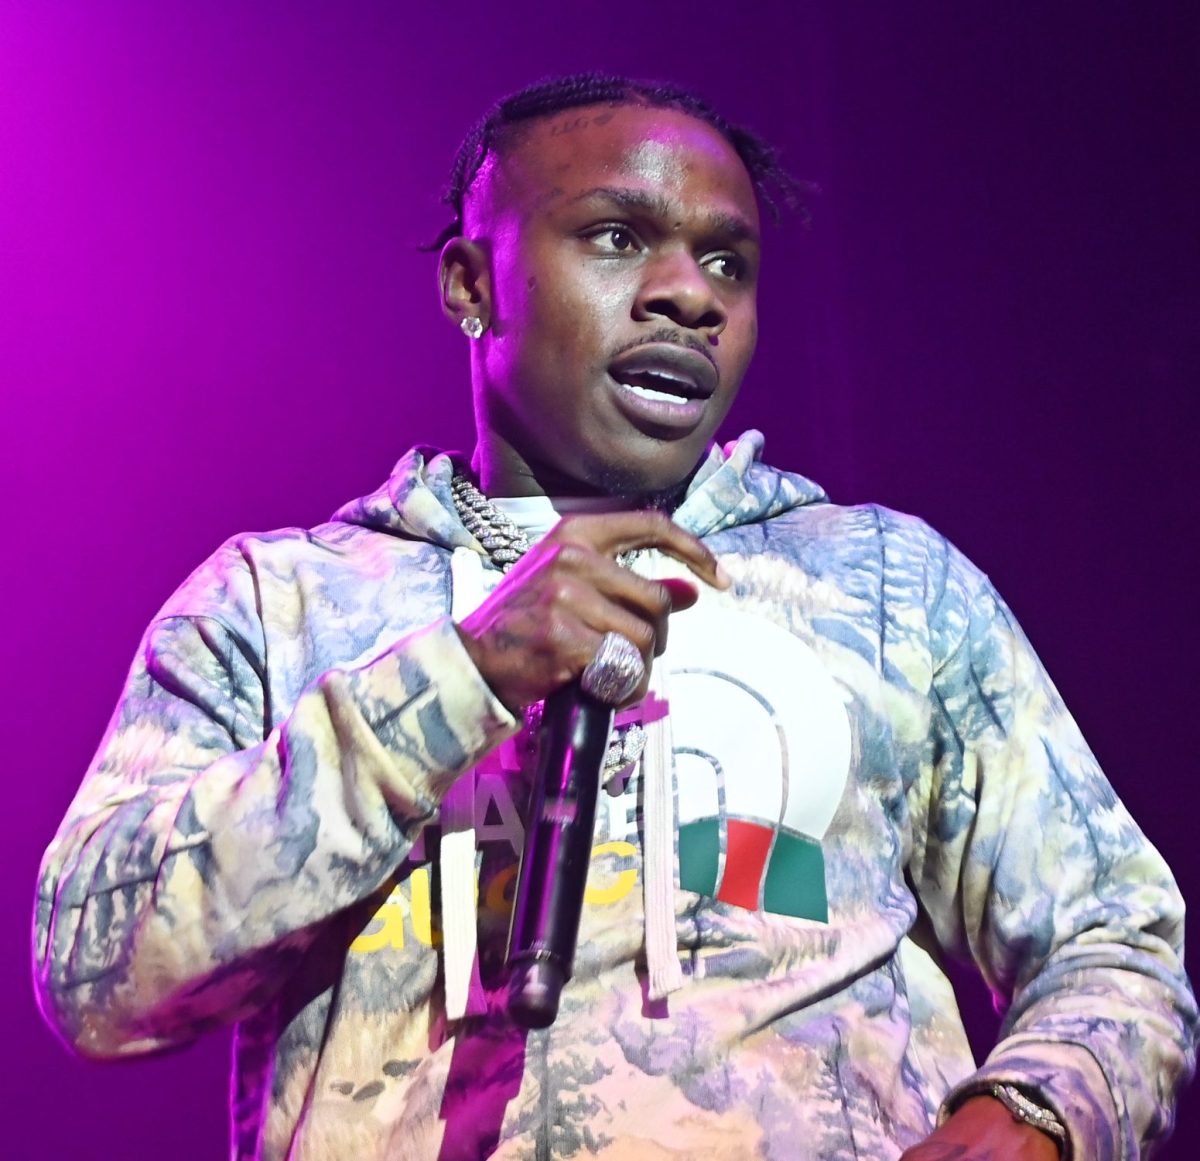 DaBaby says he would not handle things differently after recent drama that played out on social media in front of the whole world.